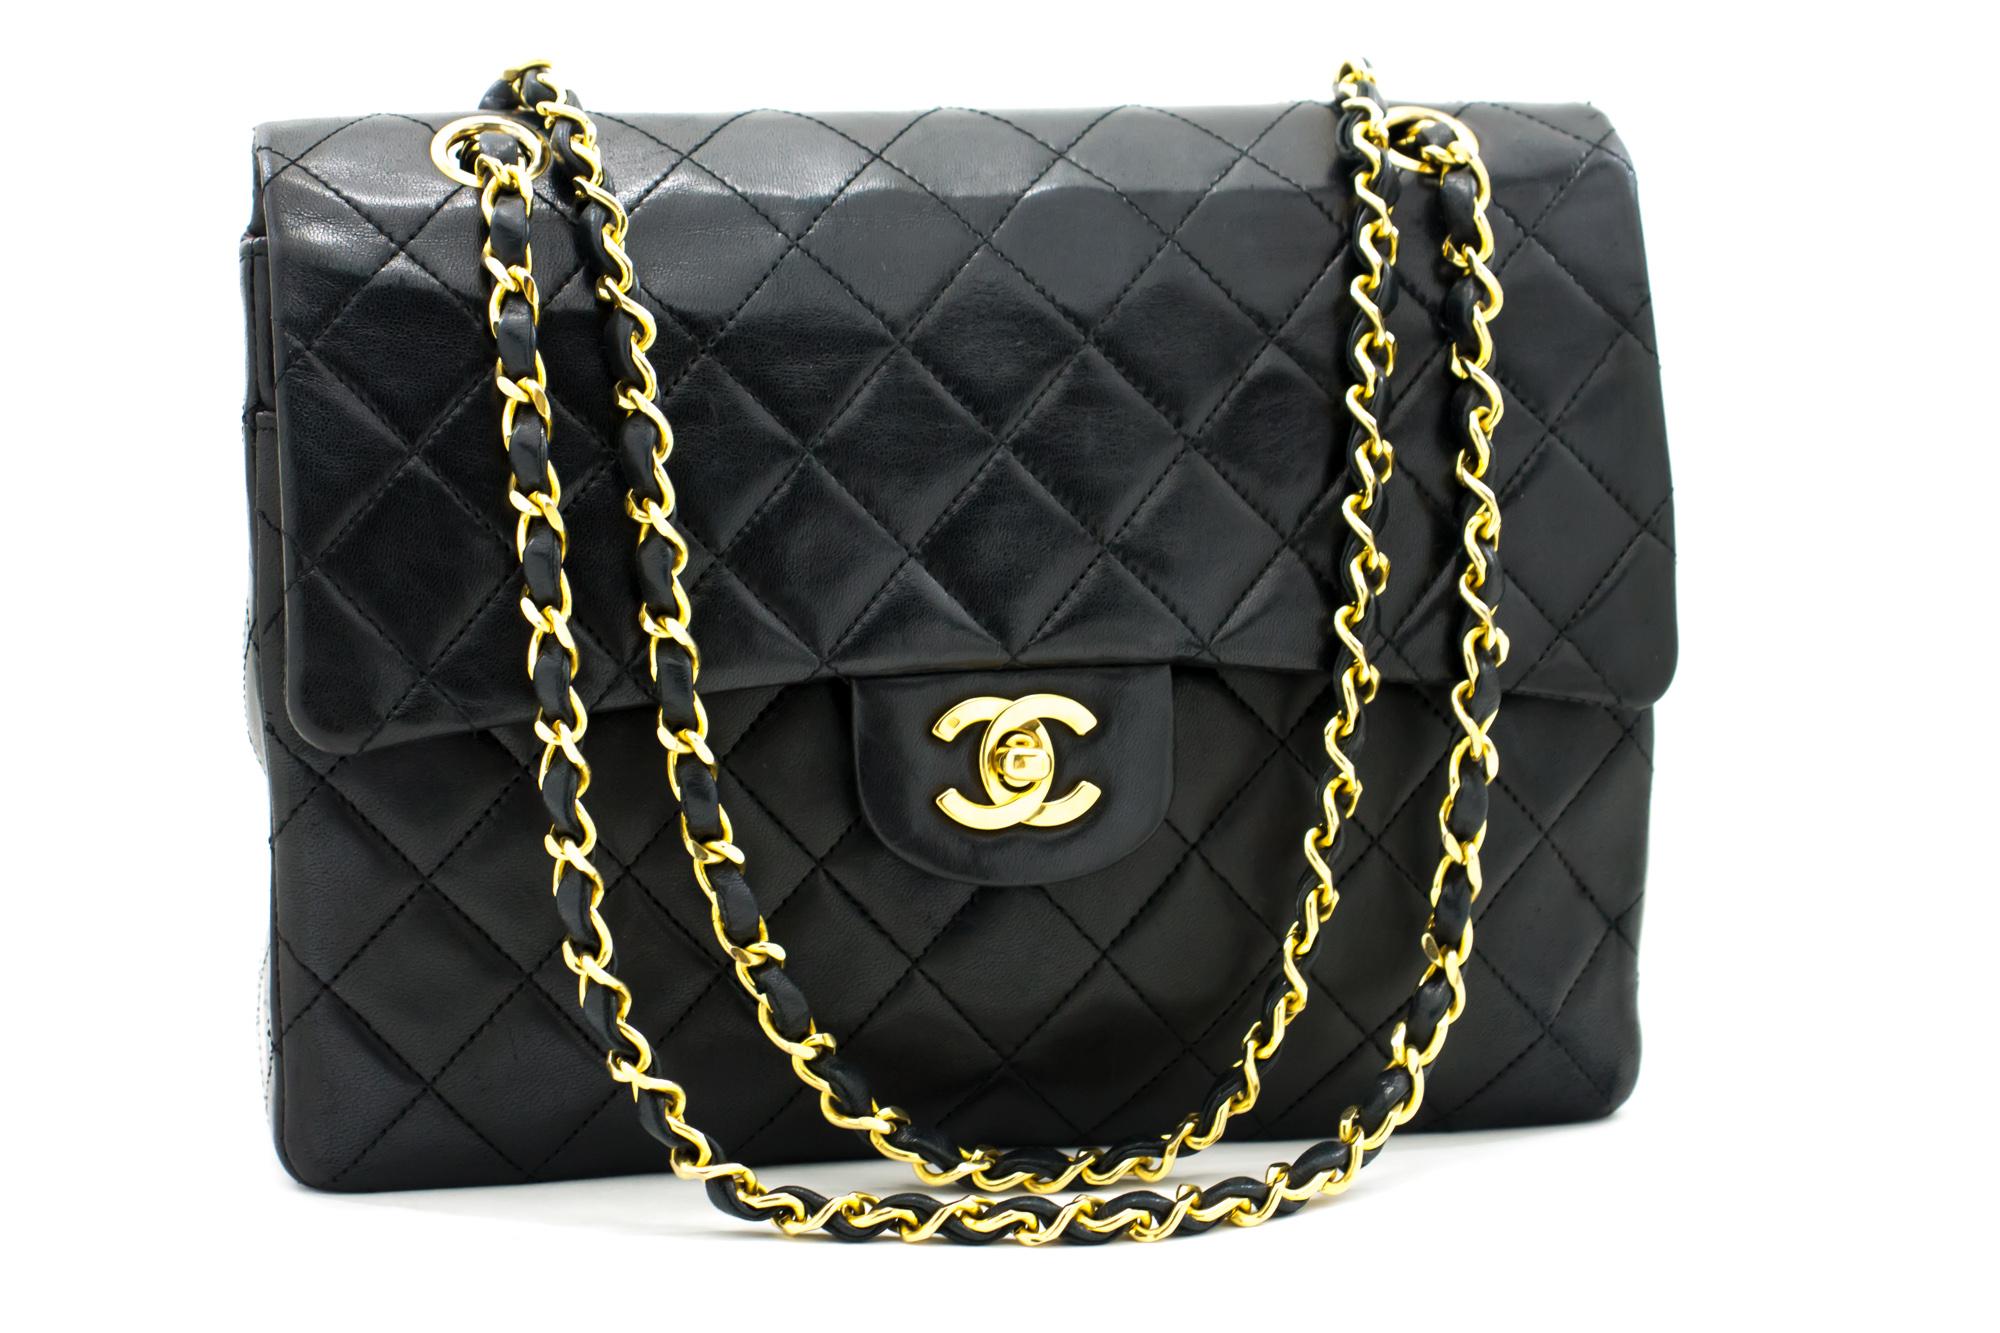 An authentic CHANEL 2.55 Classic Double Flap Square Chain Shoulder Bag Black made of black Lambskin. The color is Black. The outside material is Leather. The pattern is Solid. This item is Vintage / Classic. The year of manufacture would be